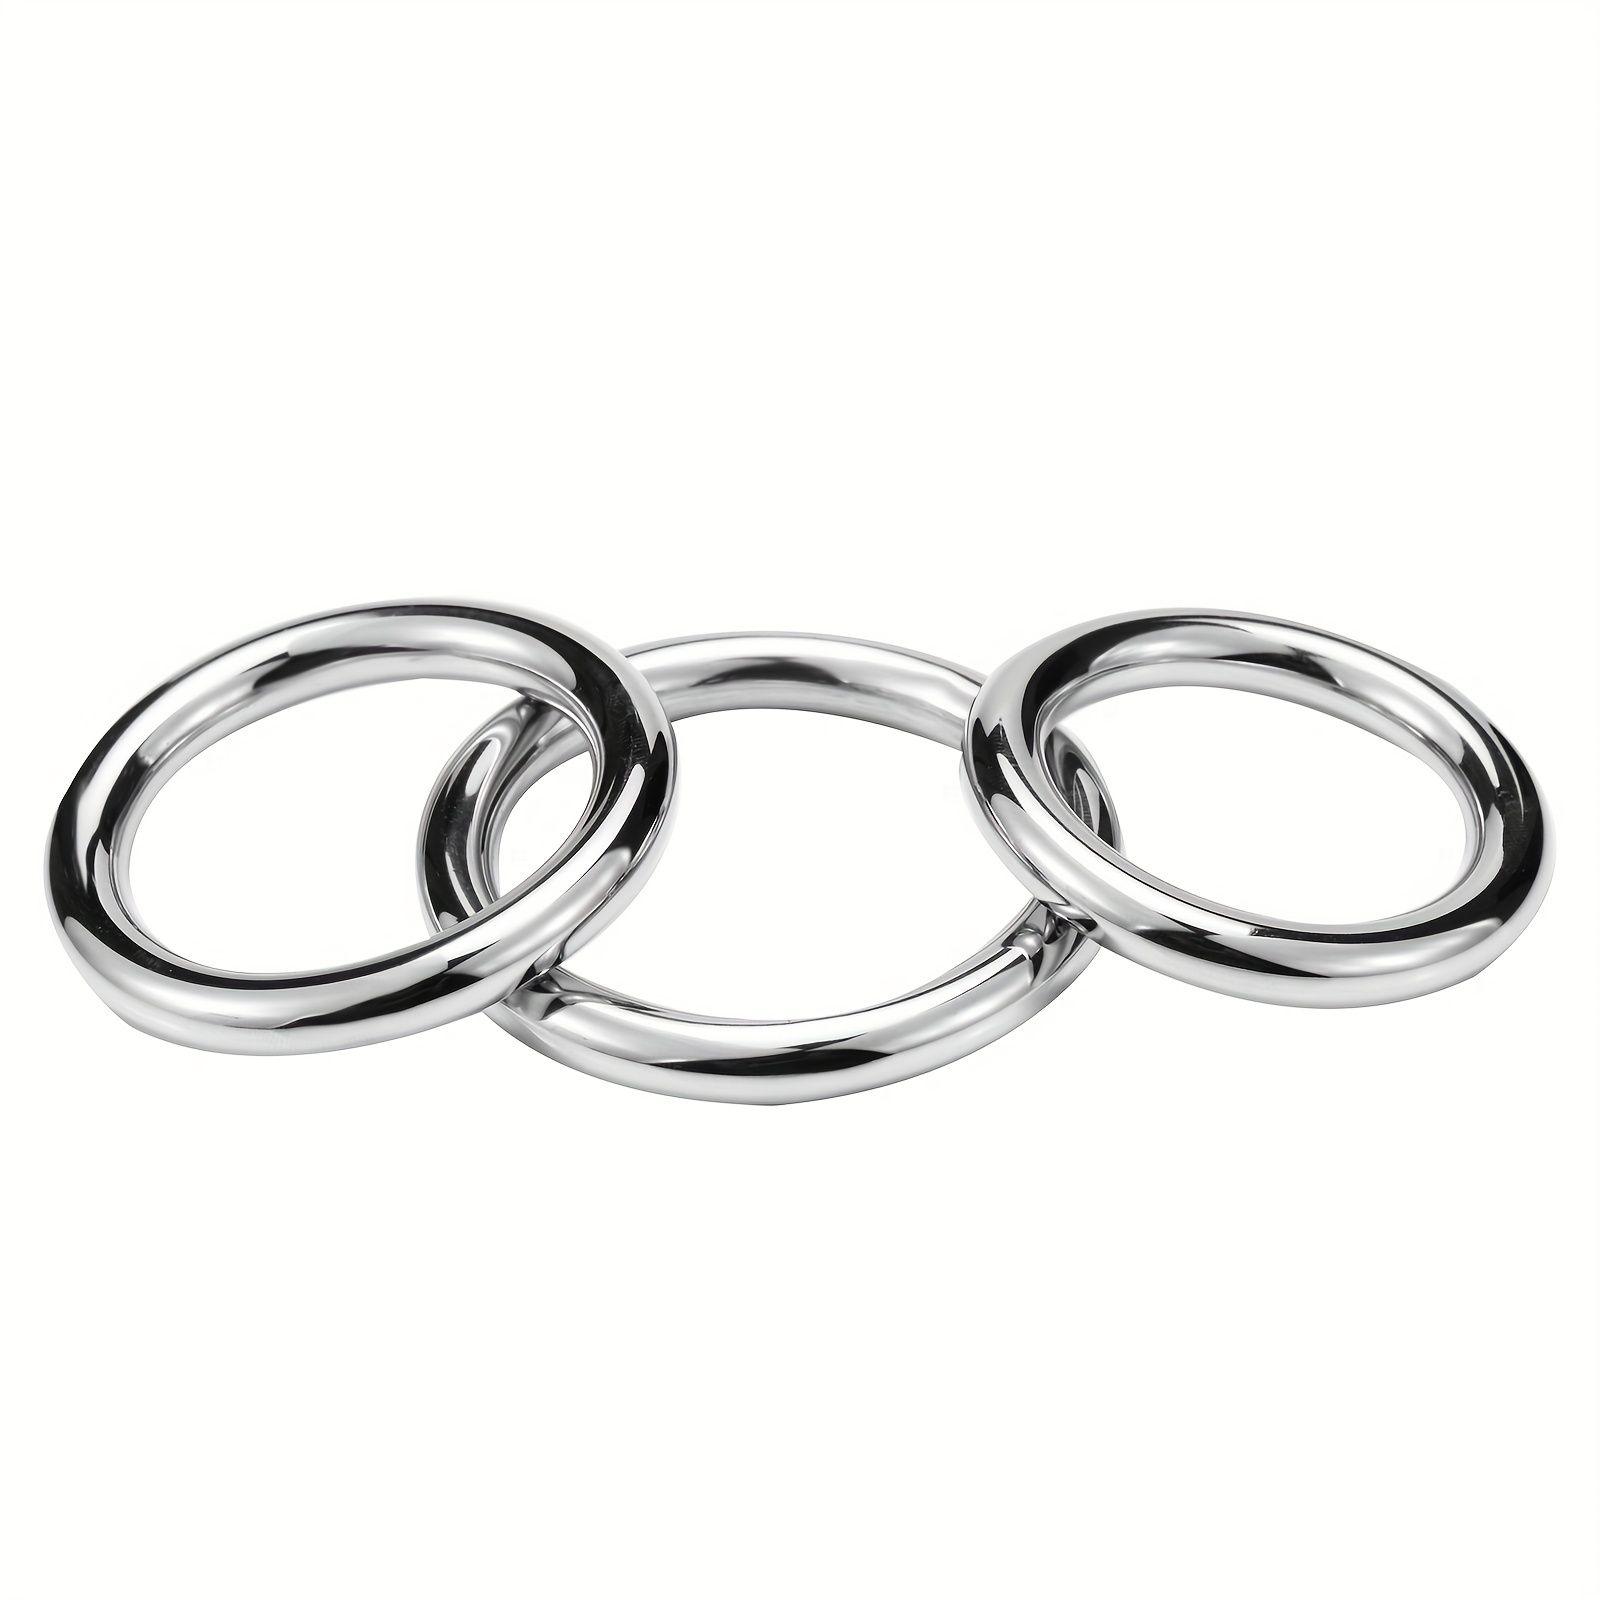 Cock Ring Metal Penis Ring is Sleek and Comfortable Cock Rings for Men Made  of Medical Grade Stainless Steel Penis Rings There are 4 Different Sizes